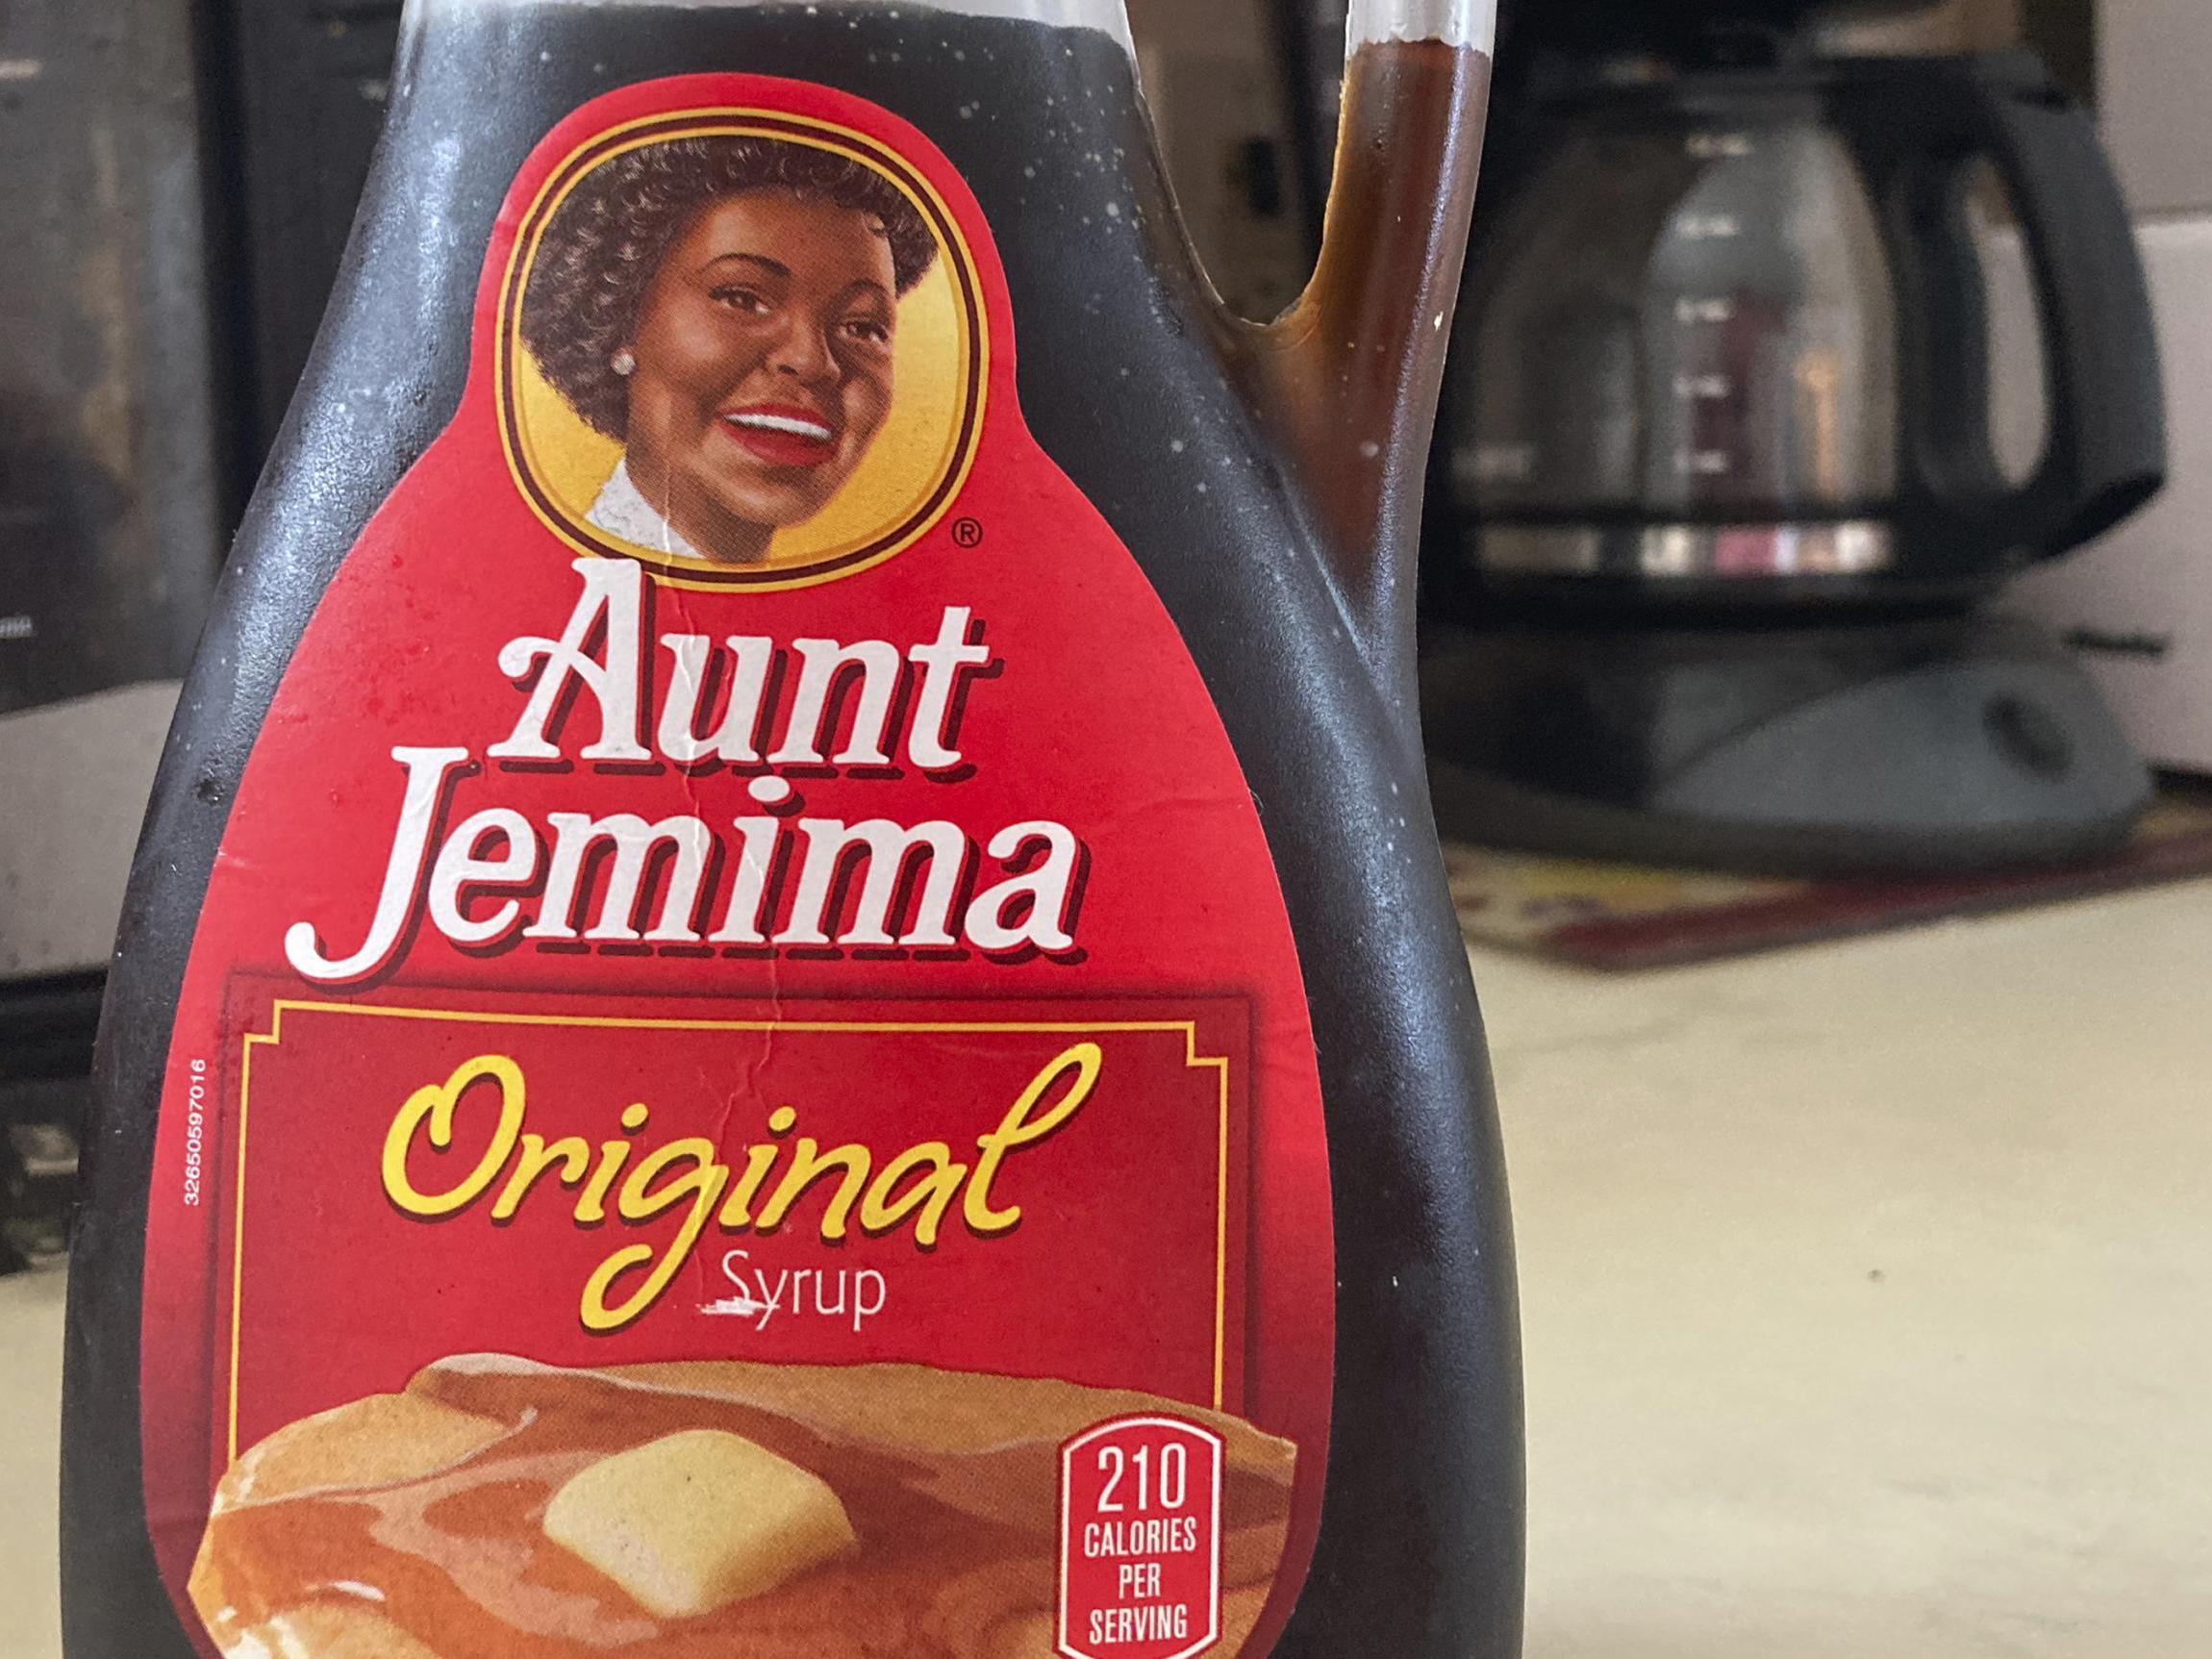 A bottle of Aunt Jemima syrup sits on a counter